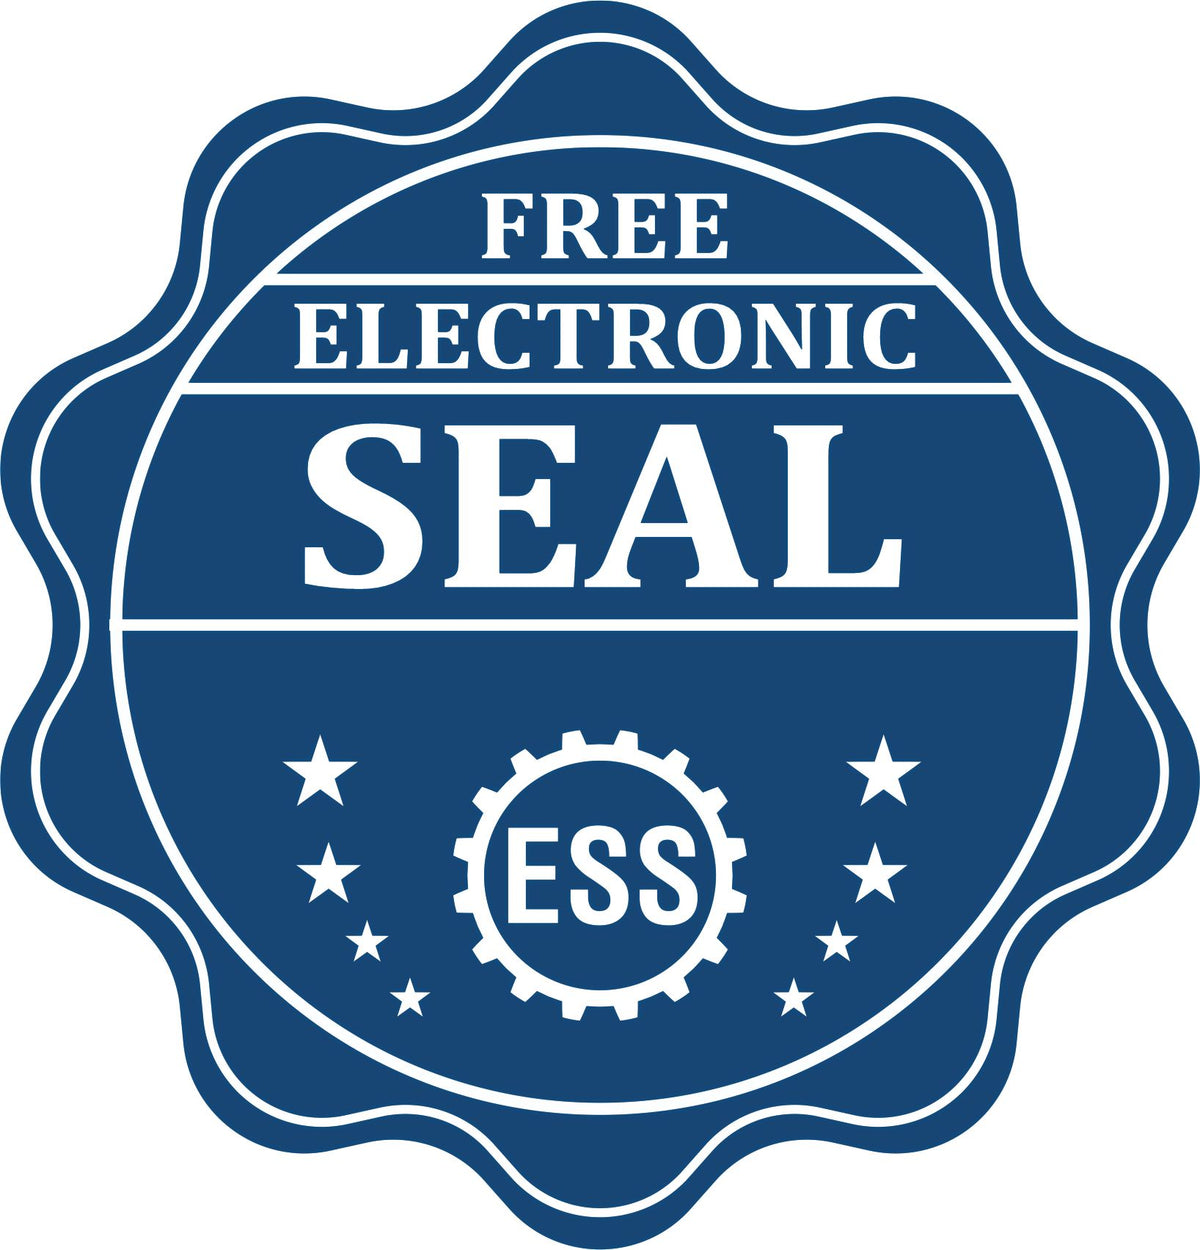 A badge showing a free electronic seal for the Handheld Delaware Architect Seal Embosser with stars and the ESS gear on the emblem.